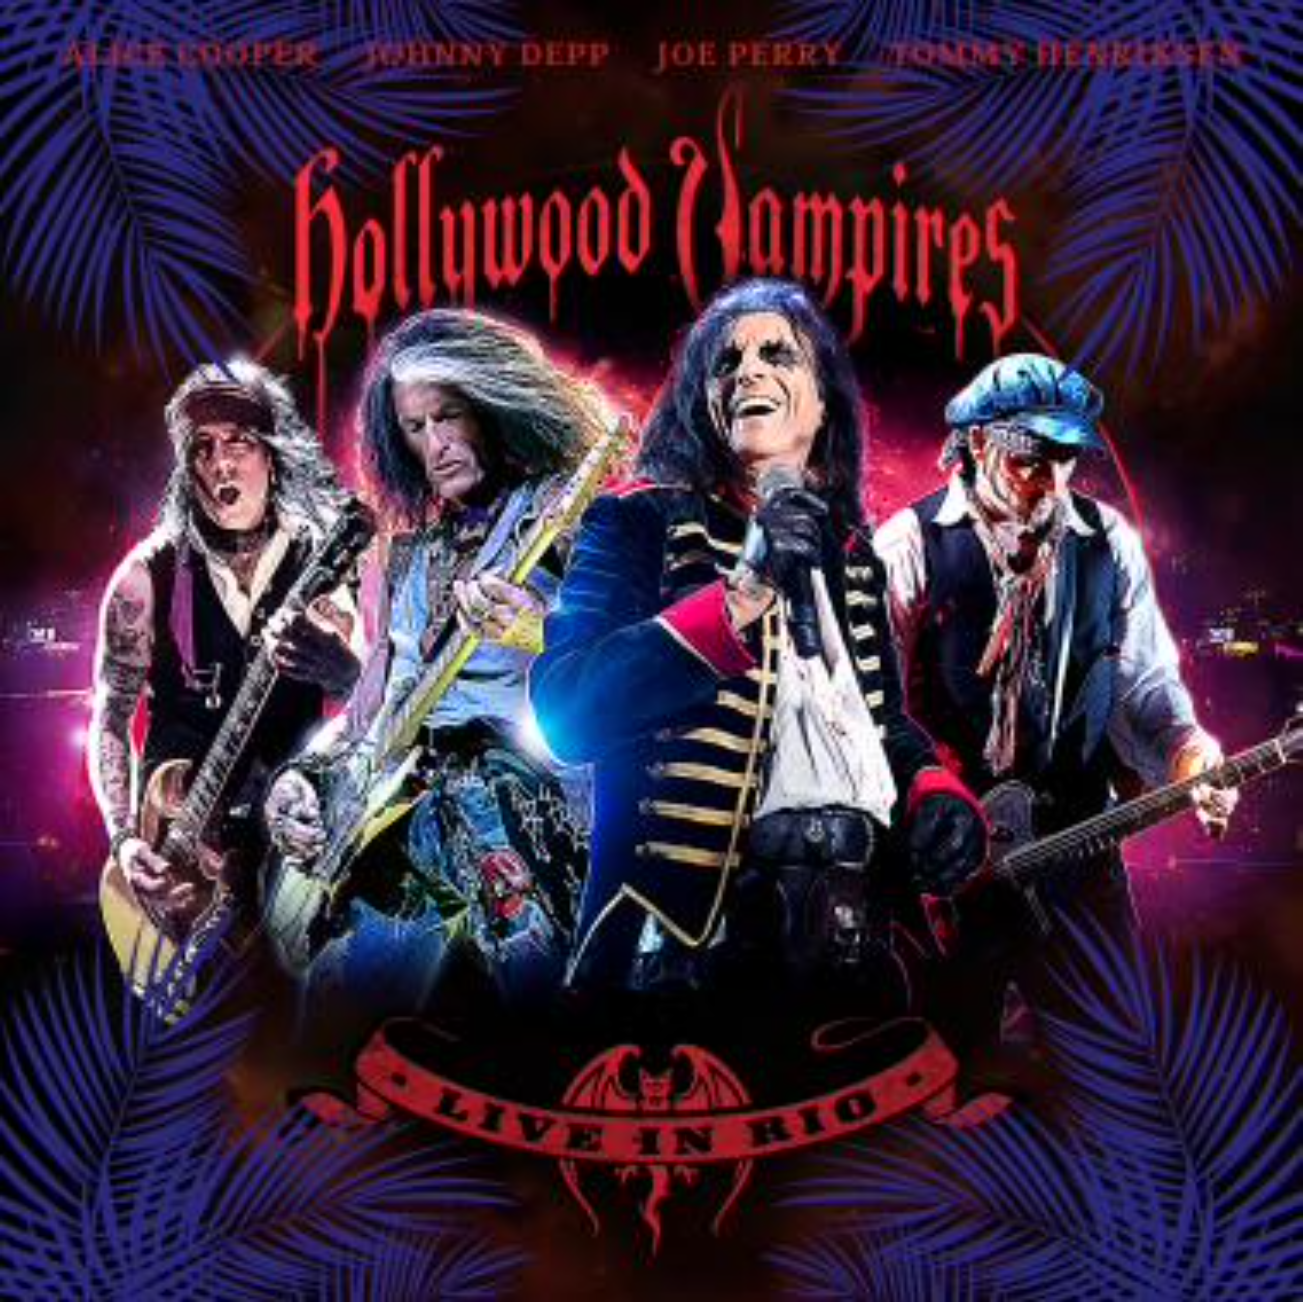 Hollywood Vampires Release "Live In Rio" Album + Share "Raise The Dead (Live In Rio)" Video